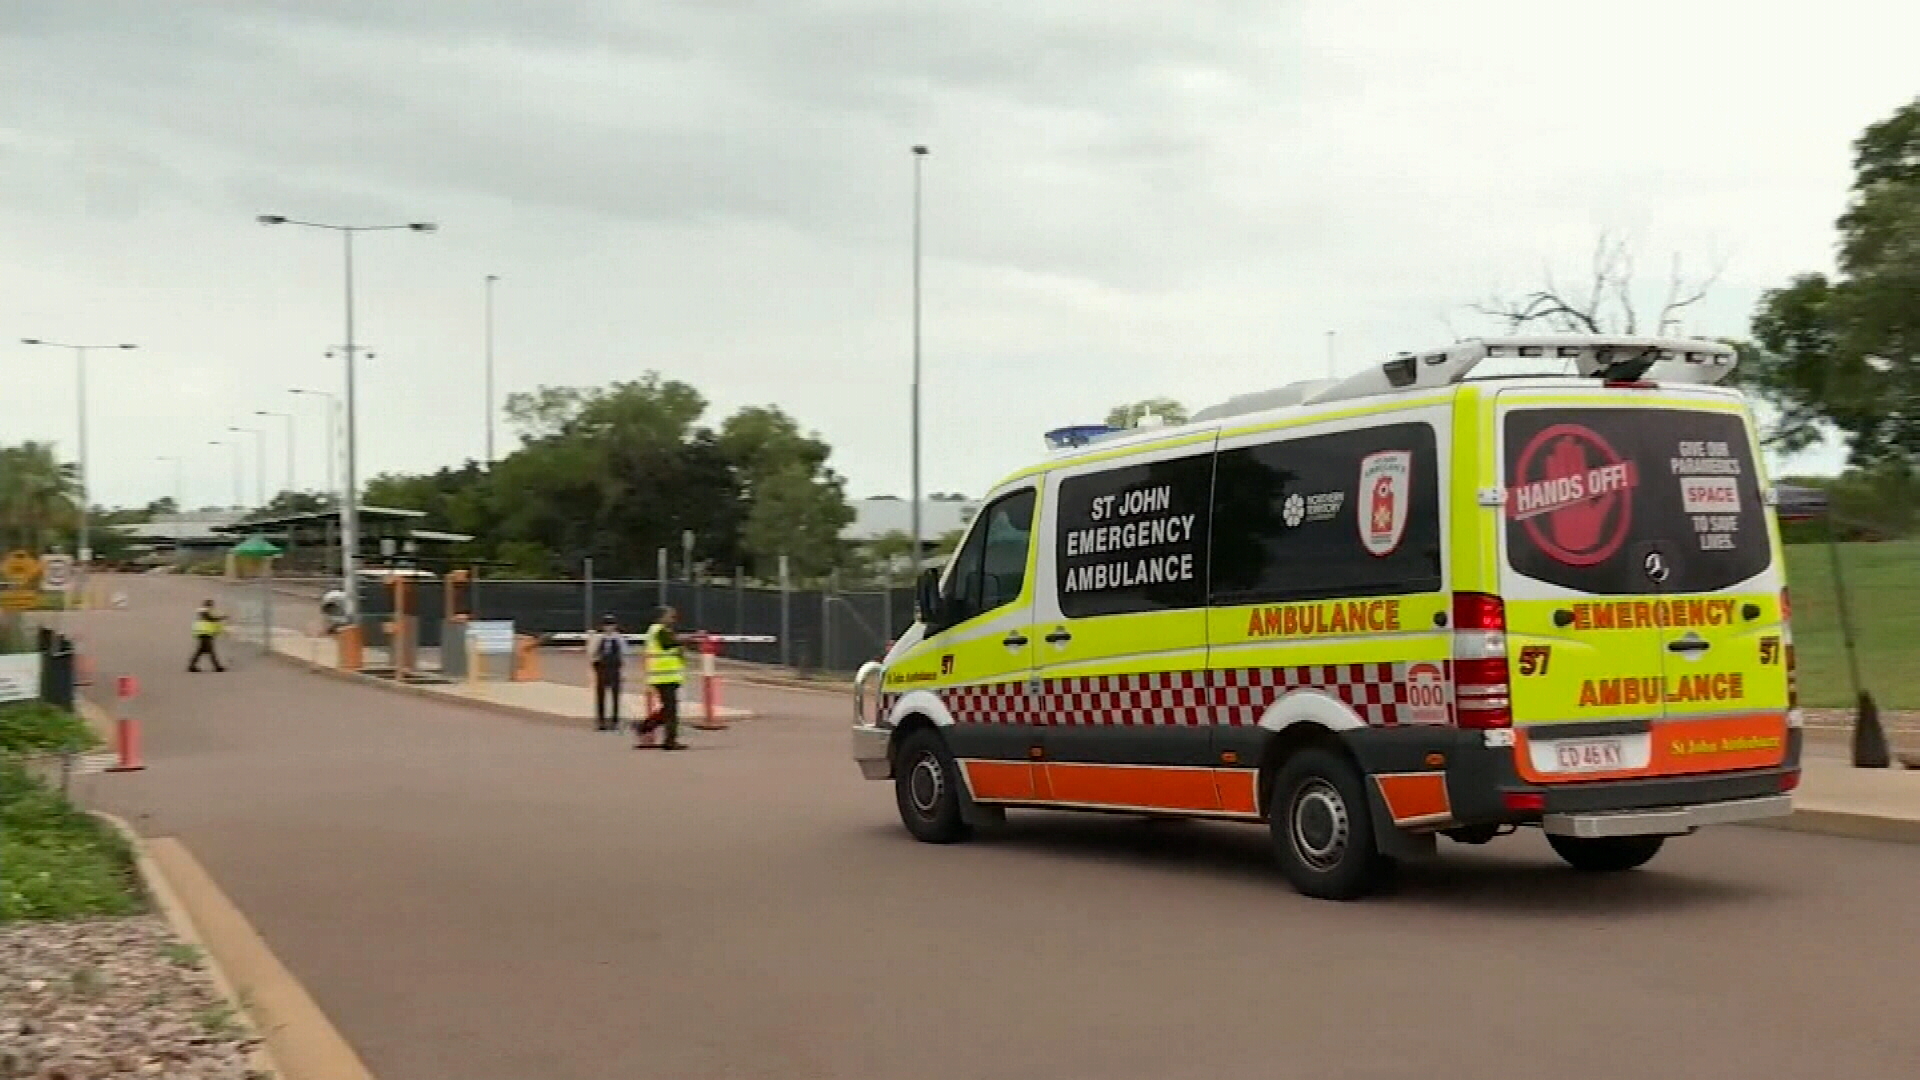 Ambulances arrive at the quarantine site after more confirmed cases of COVID-19 emerge. 